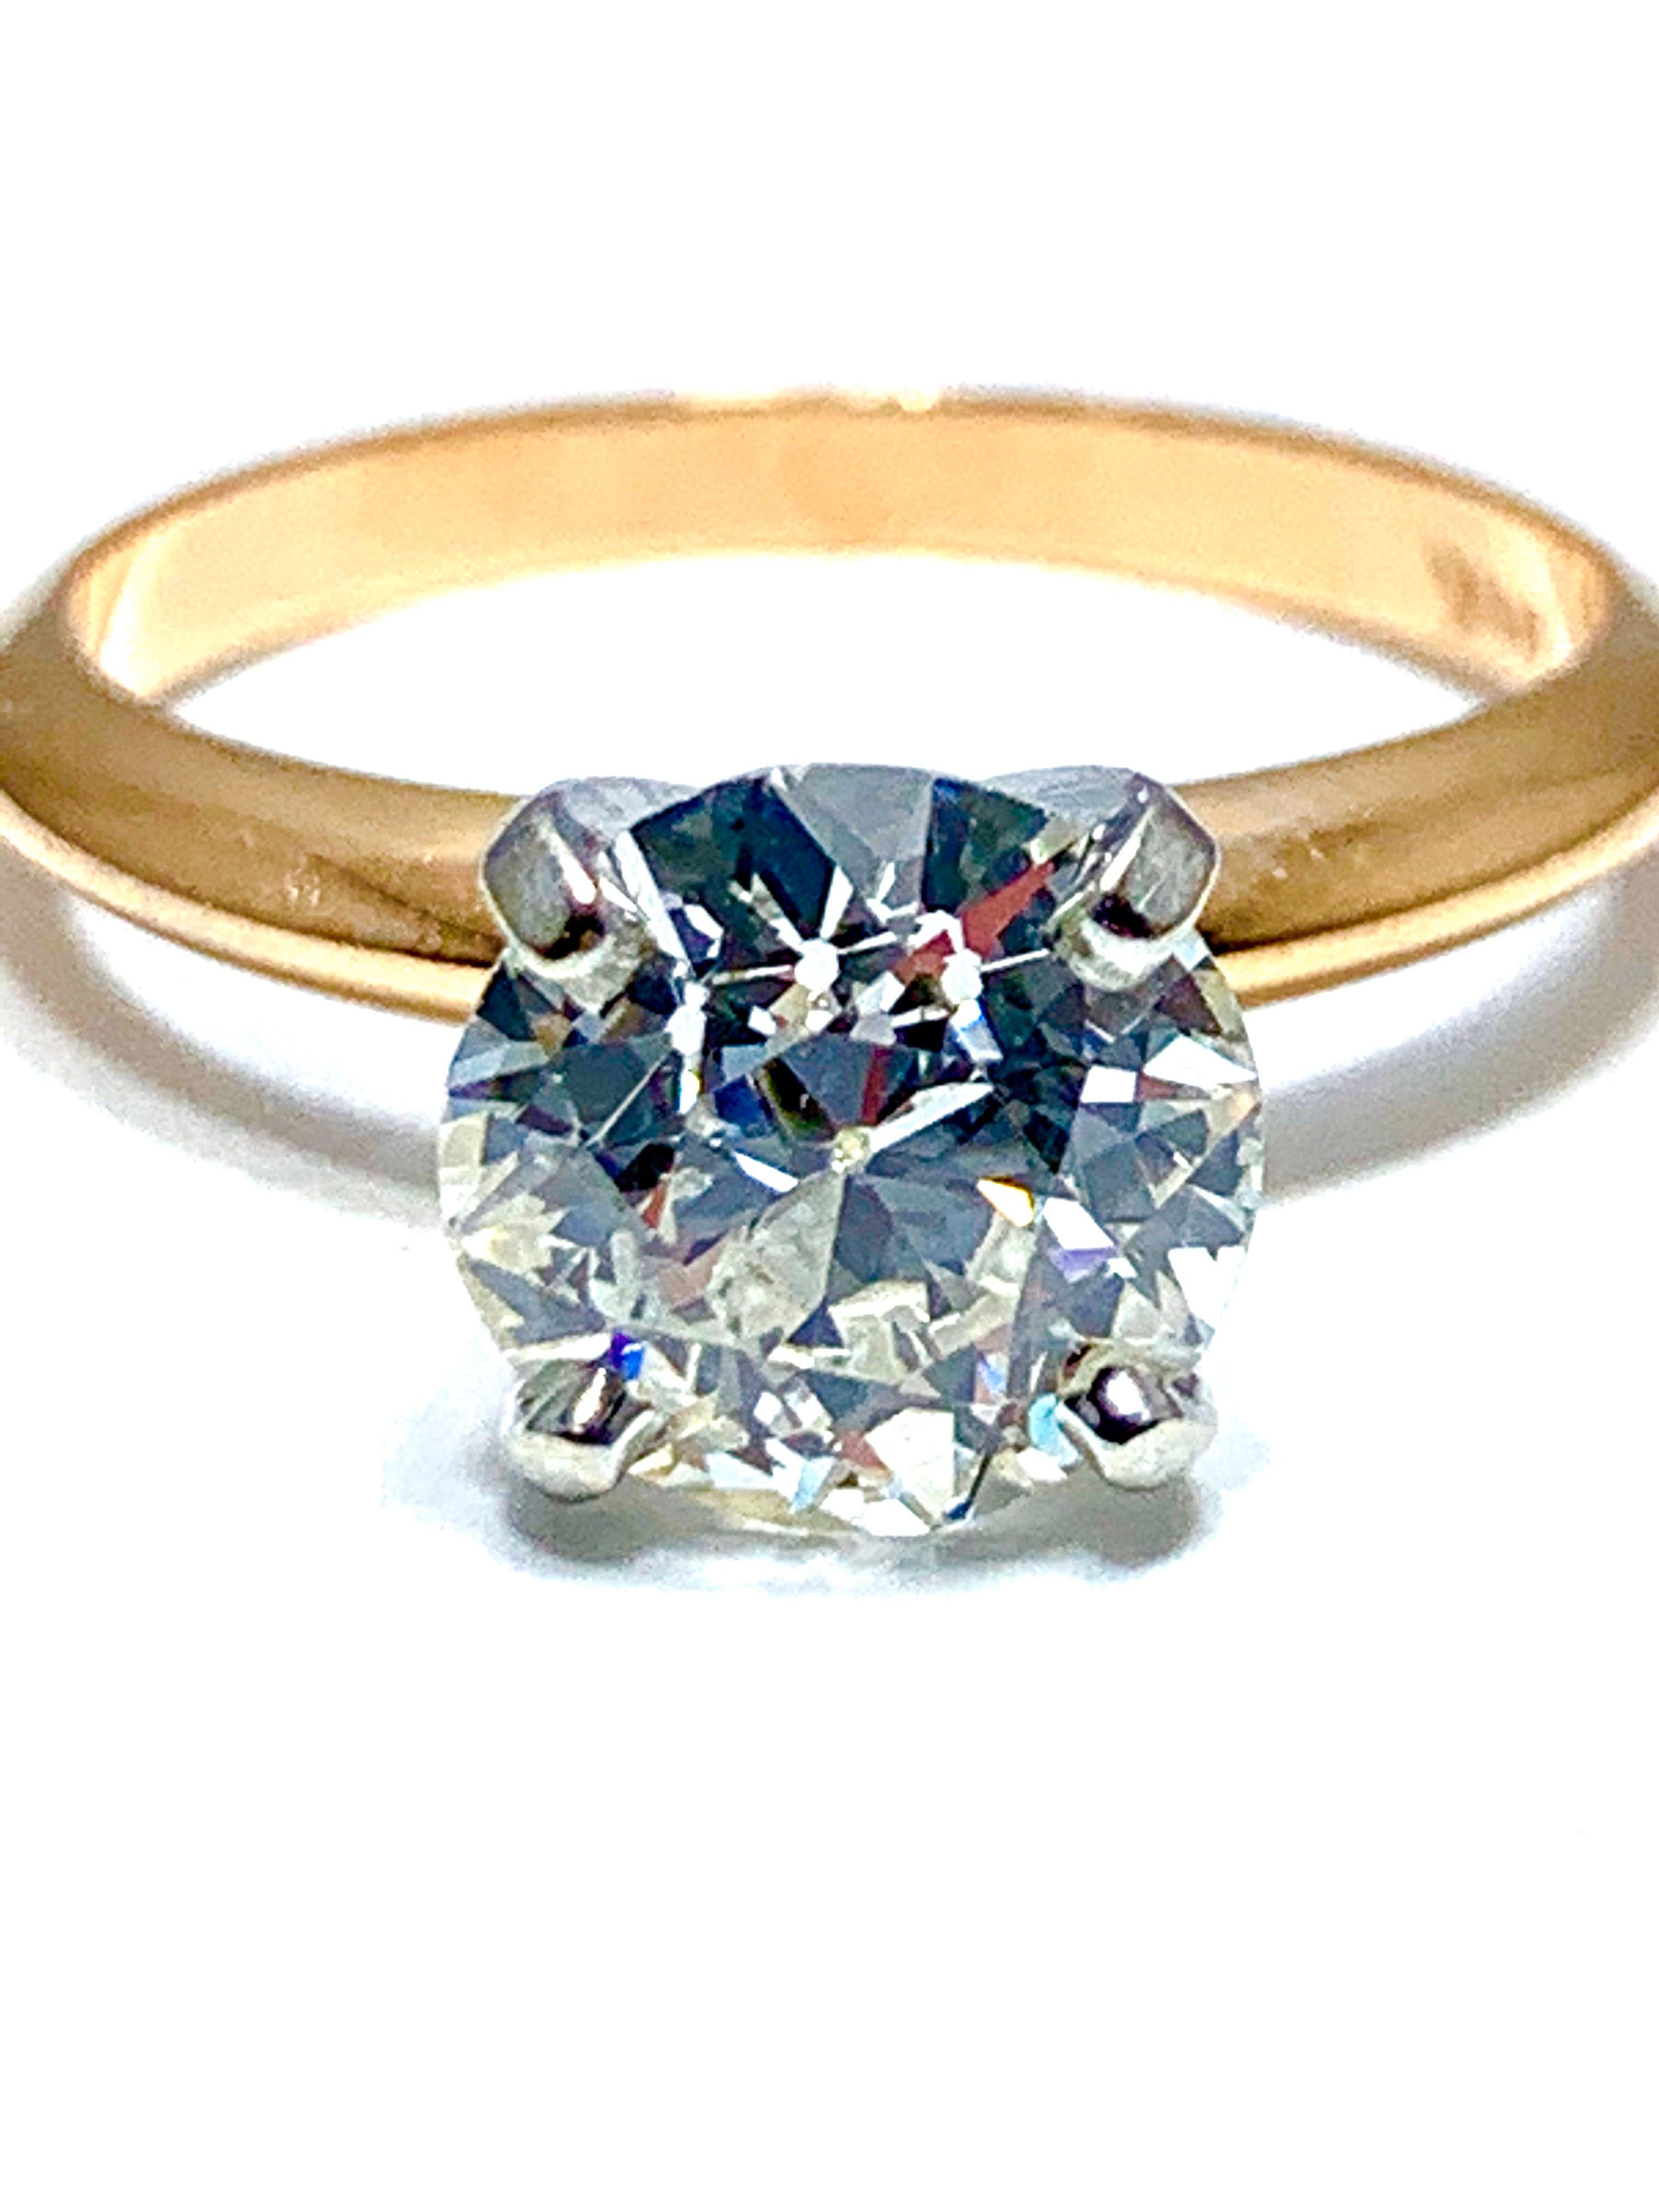 A gorgeous 1.52 carat old European cut diamond solitaire engagement ring.  The diamond is graded as I color, SI1 clarity, and  is set with a four prong platinum head, and a 14 karat rose gold knife edge shank.  The ring is currently a size 5.50, and